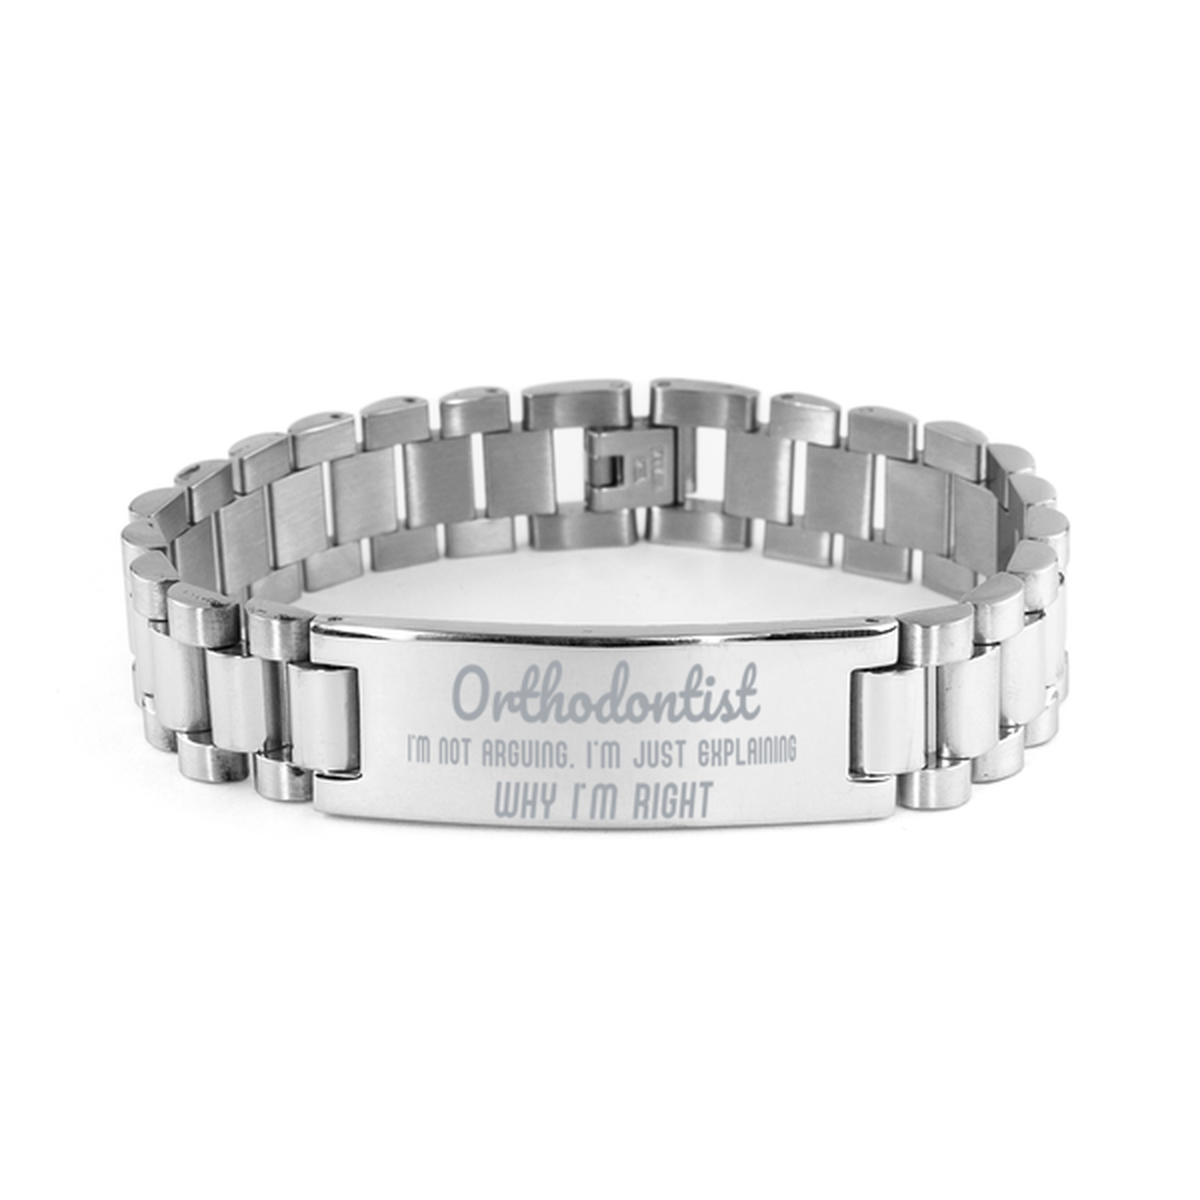 Orthodontist I'm not Arguing. I'm Just Explaining Why I'm RIGHT Ladder Stainless Steel Bracelet, Graduation Birthday Christmas Orthodontist Gifts For Orthodontist Funny Saying Quote Present for Men Women Coworker